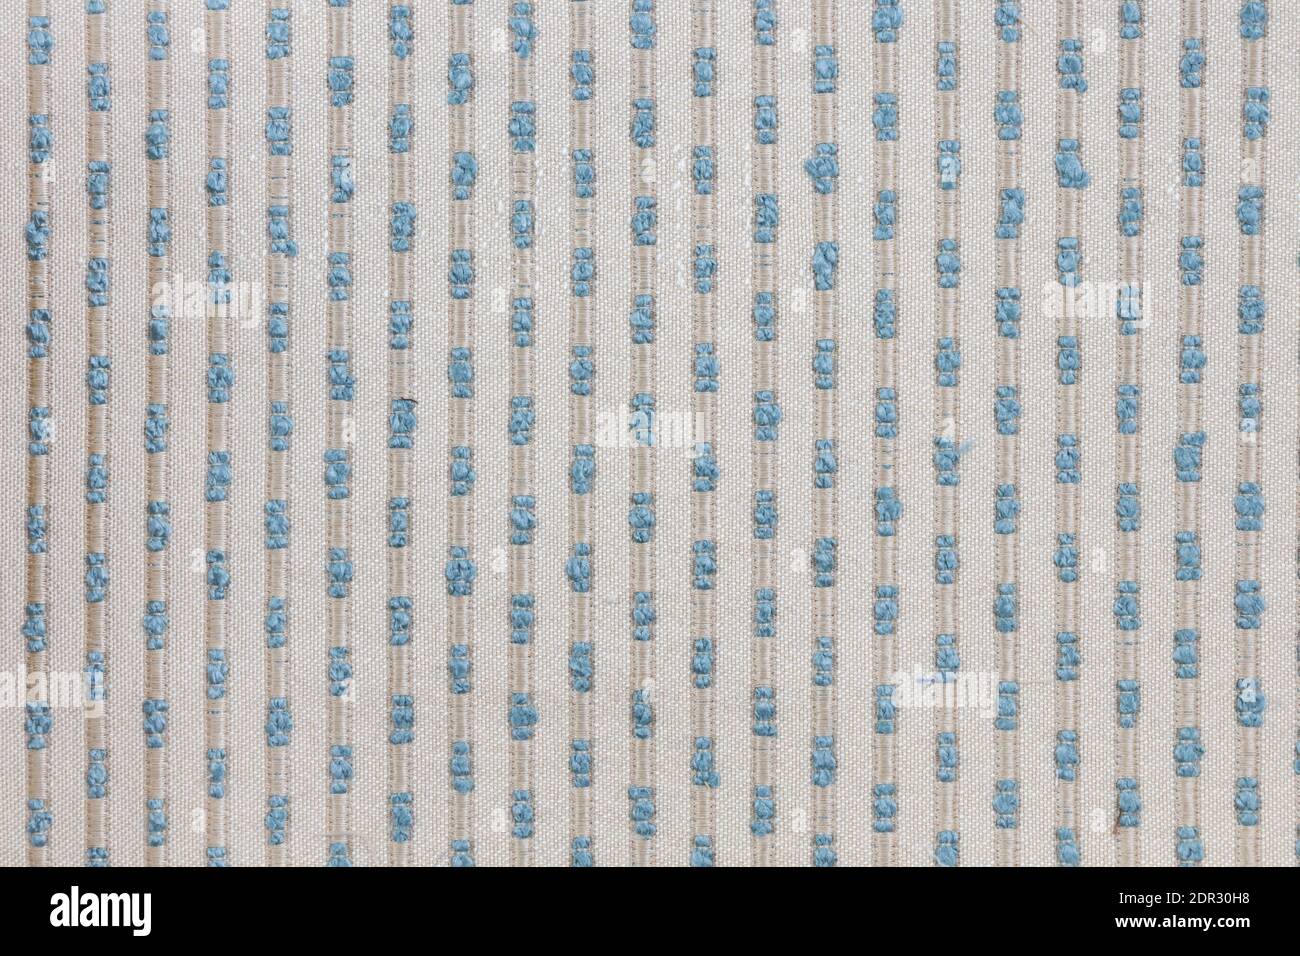 Full Frame Shot Of Patterned Cloth Stock Photo